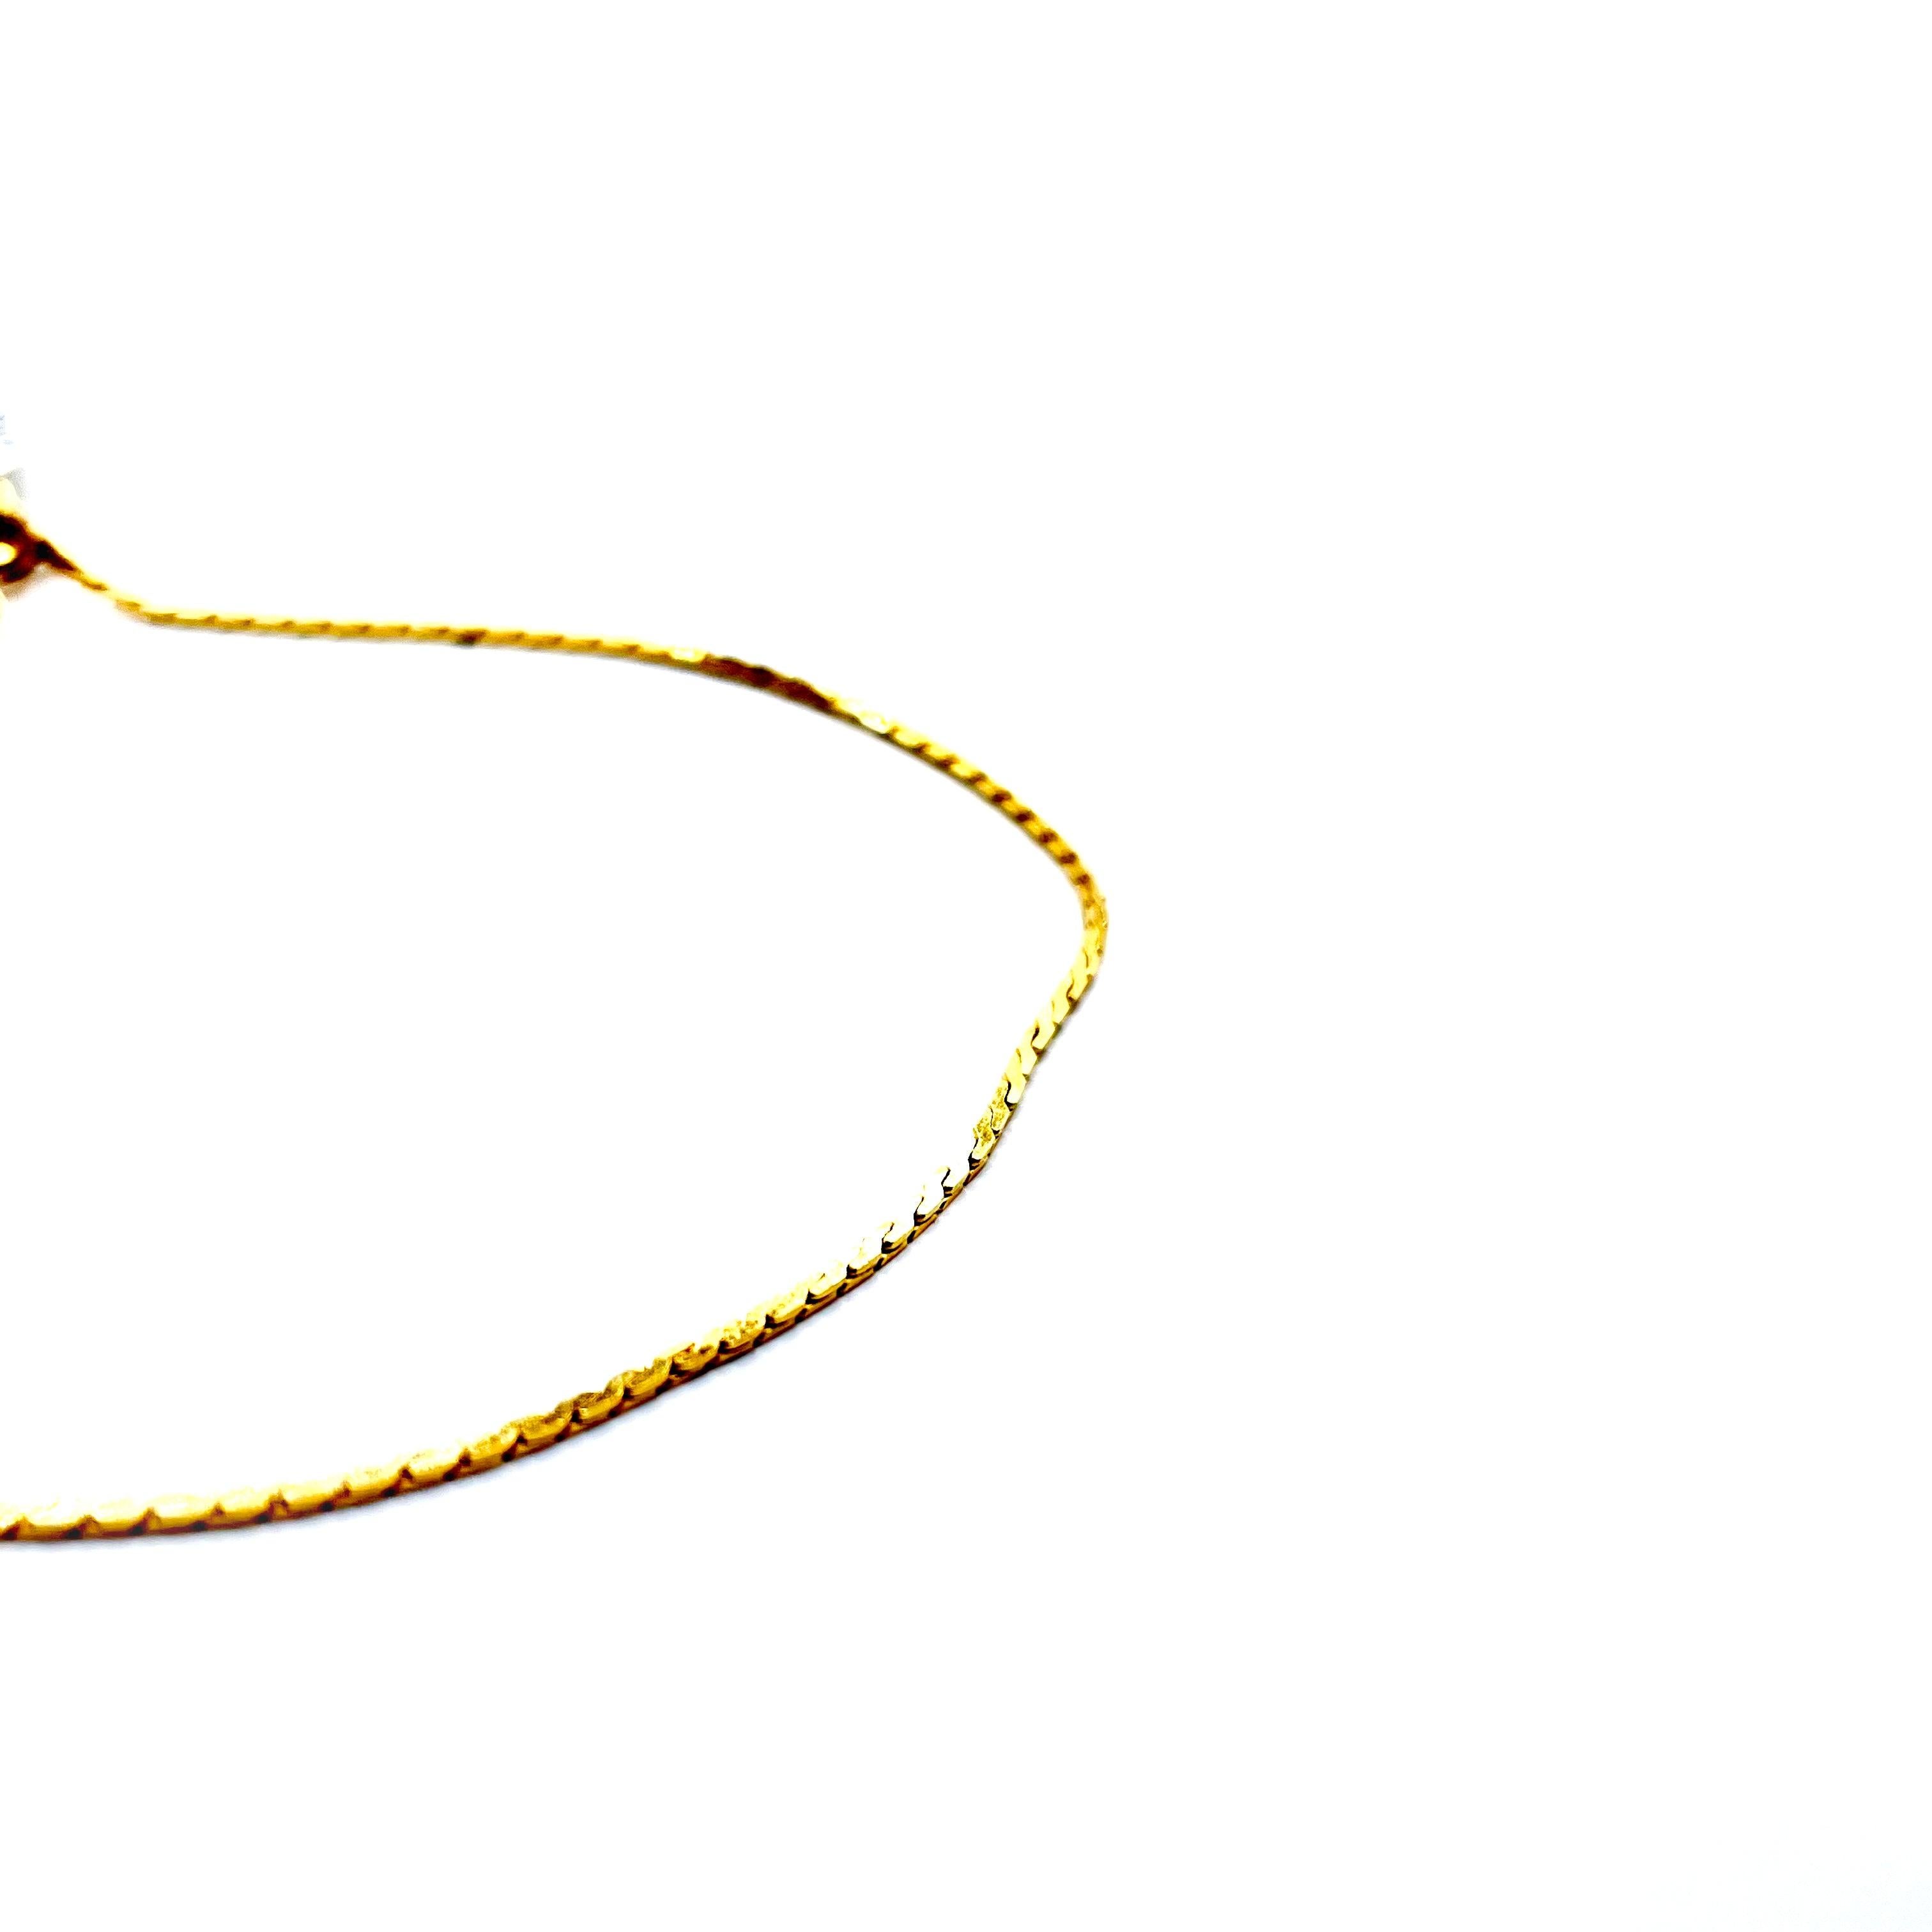 Achieve timeless elegance with this 14K Yellow Gold Chain Bracelet. 
This exquisite bracelet features a classic design with a polished 14K yellow gold chain.

